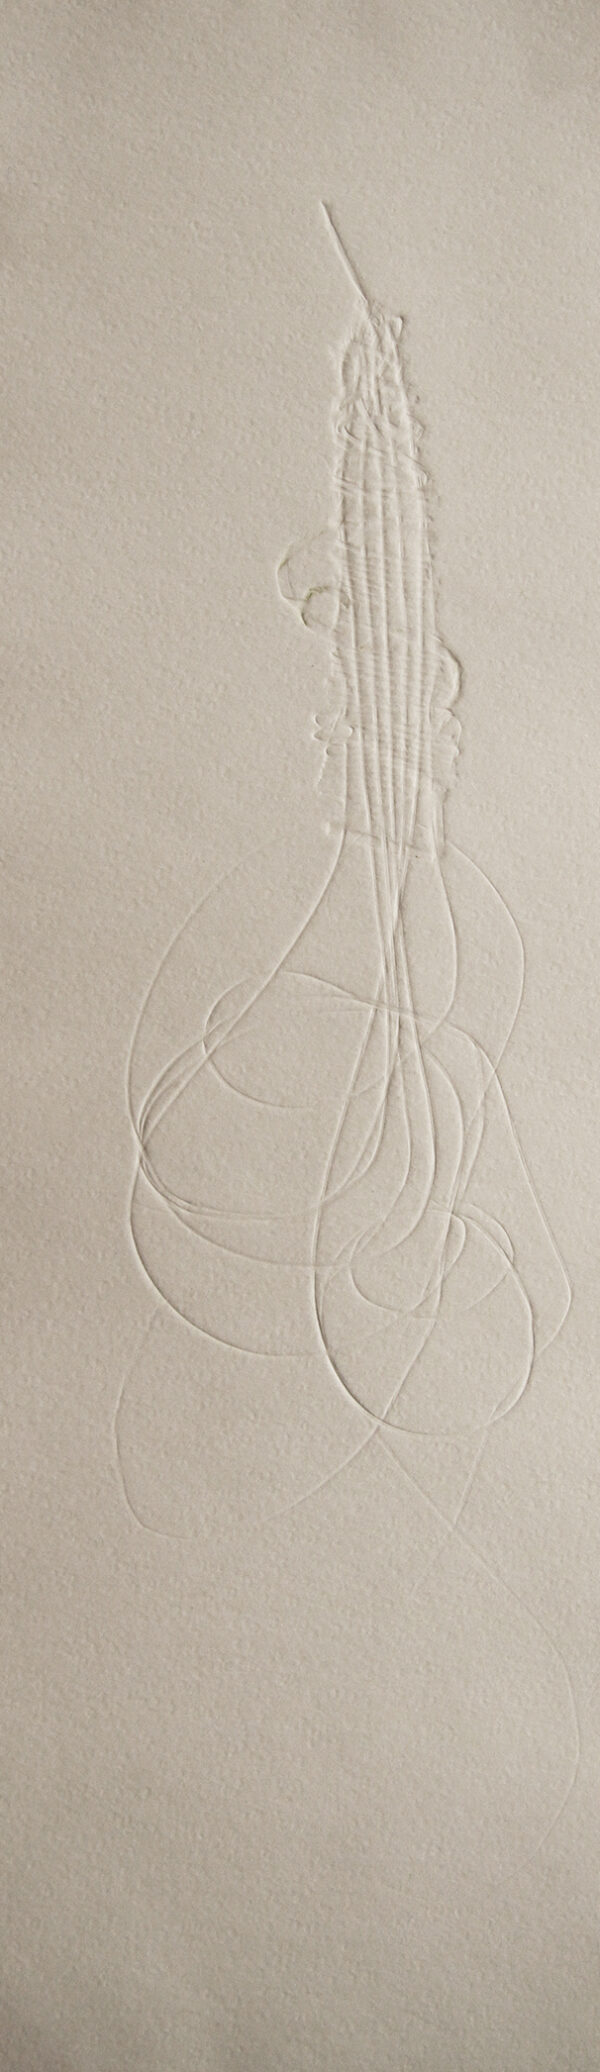 Thick, cream coloured with subtle detailed lines of varying thickness which form abstract looped complex organic forms.